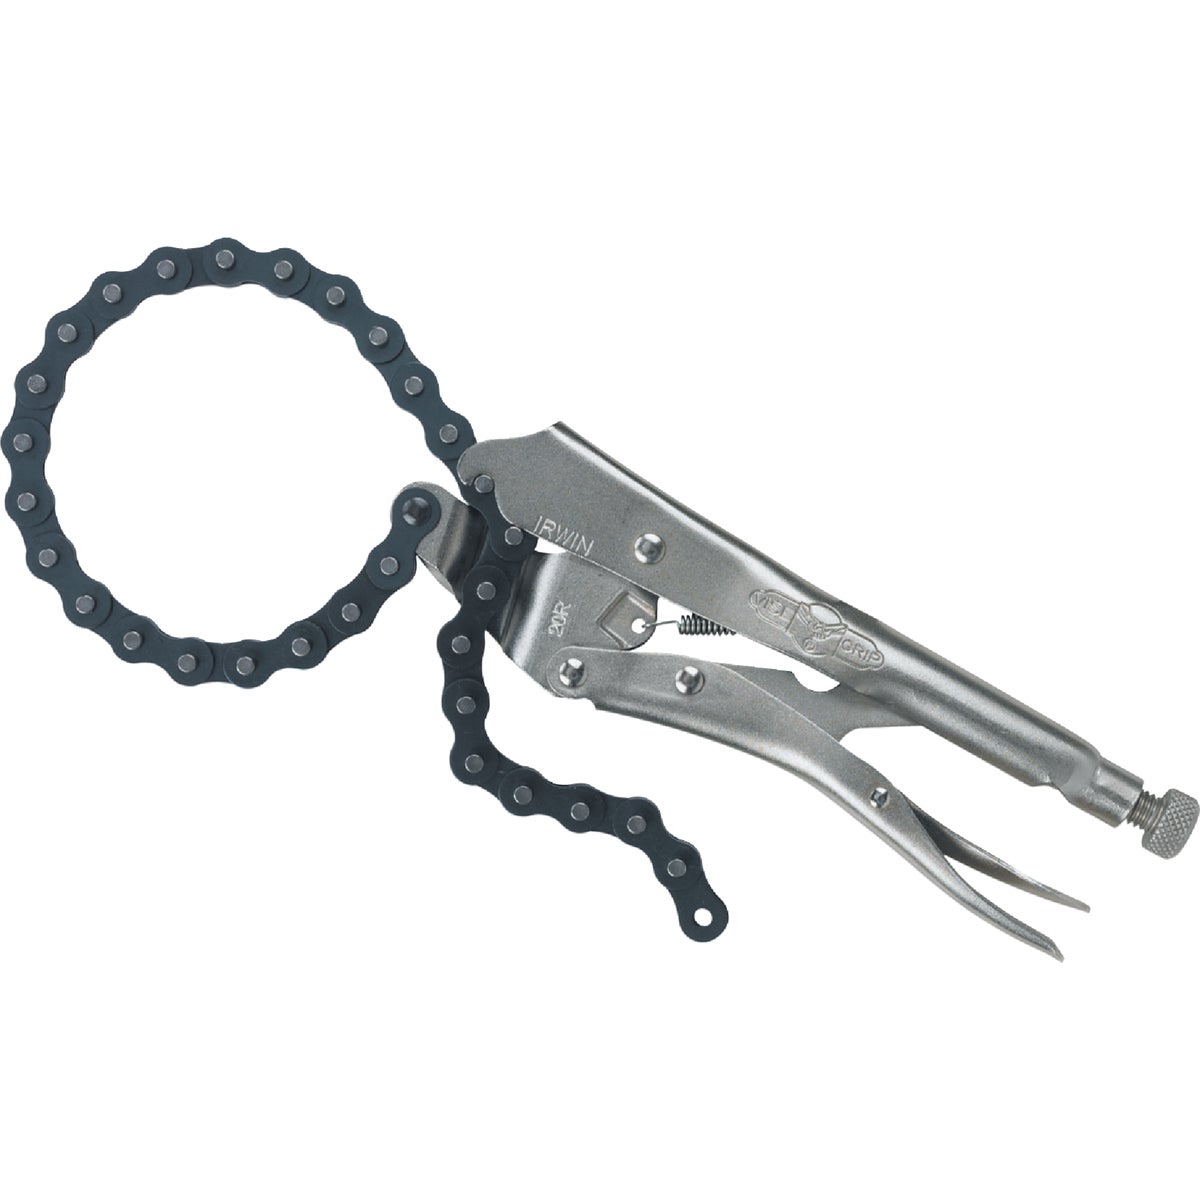 Item 330635, Chain holds and locks around anything, any size, any shape - anywhere chain